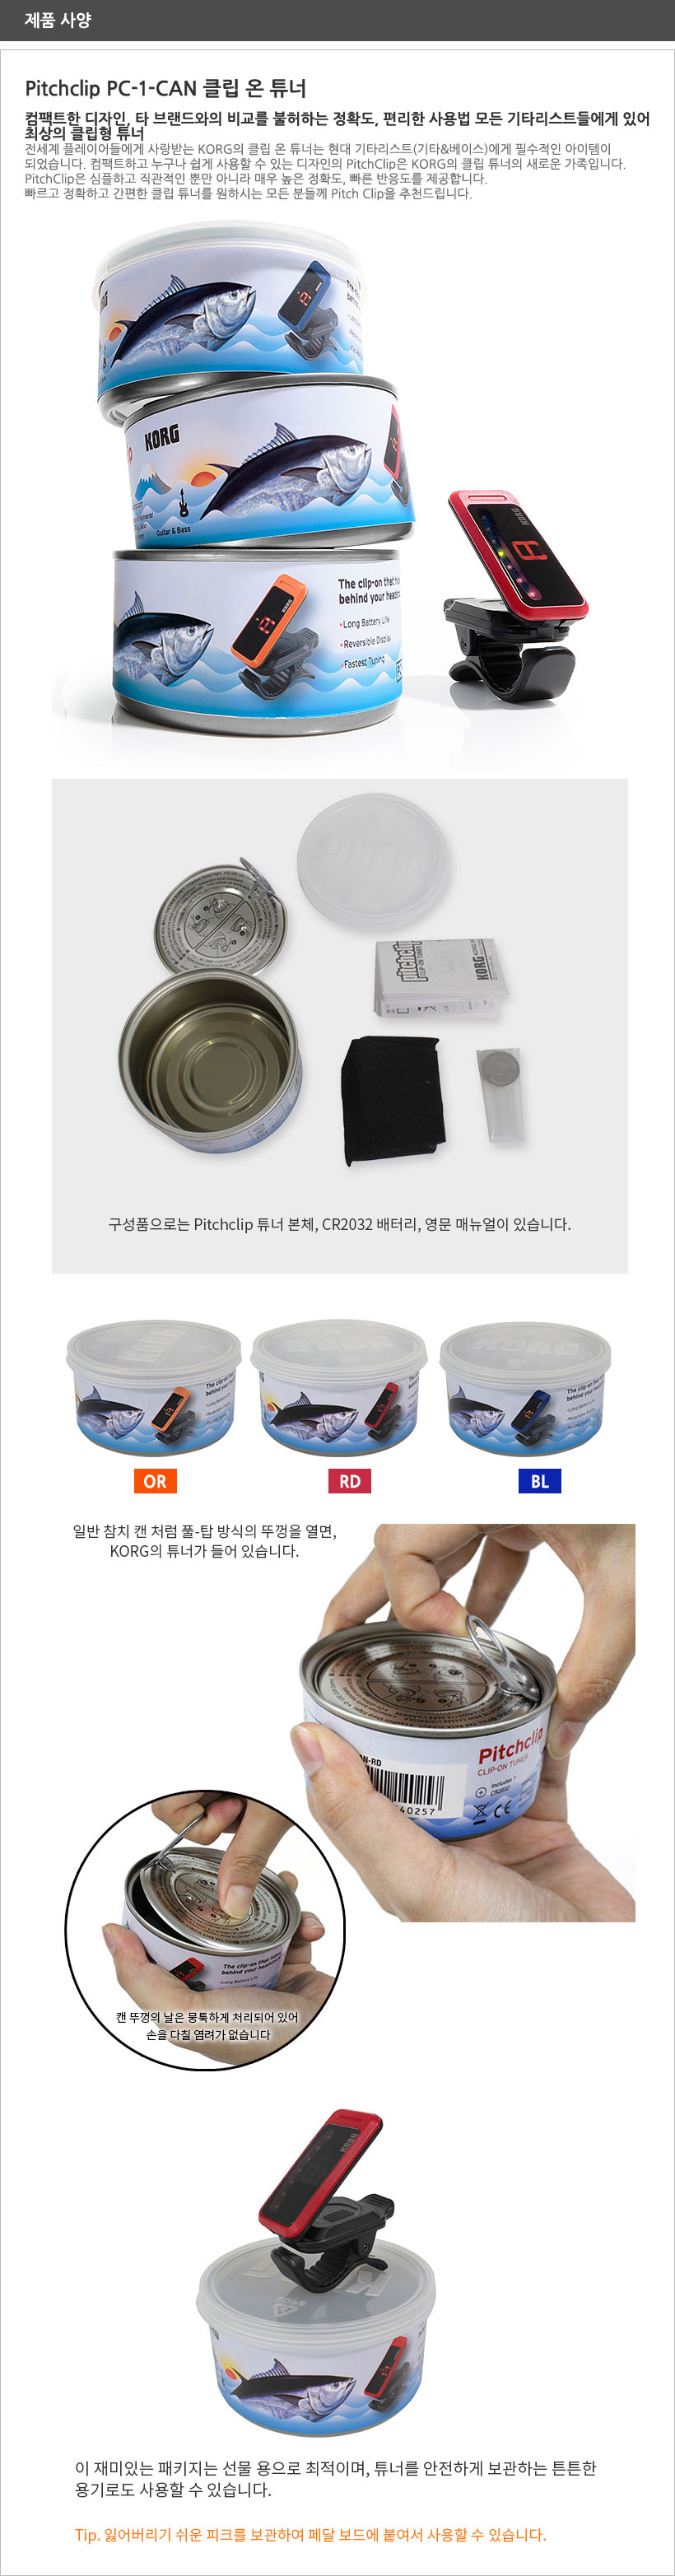 Pitchclip PC-1-CAN 제품구성